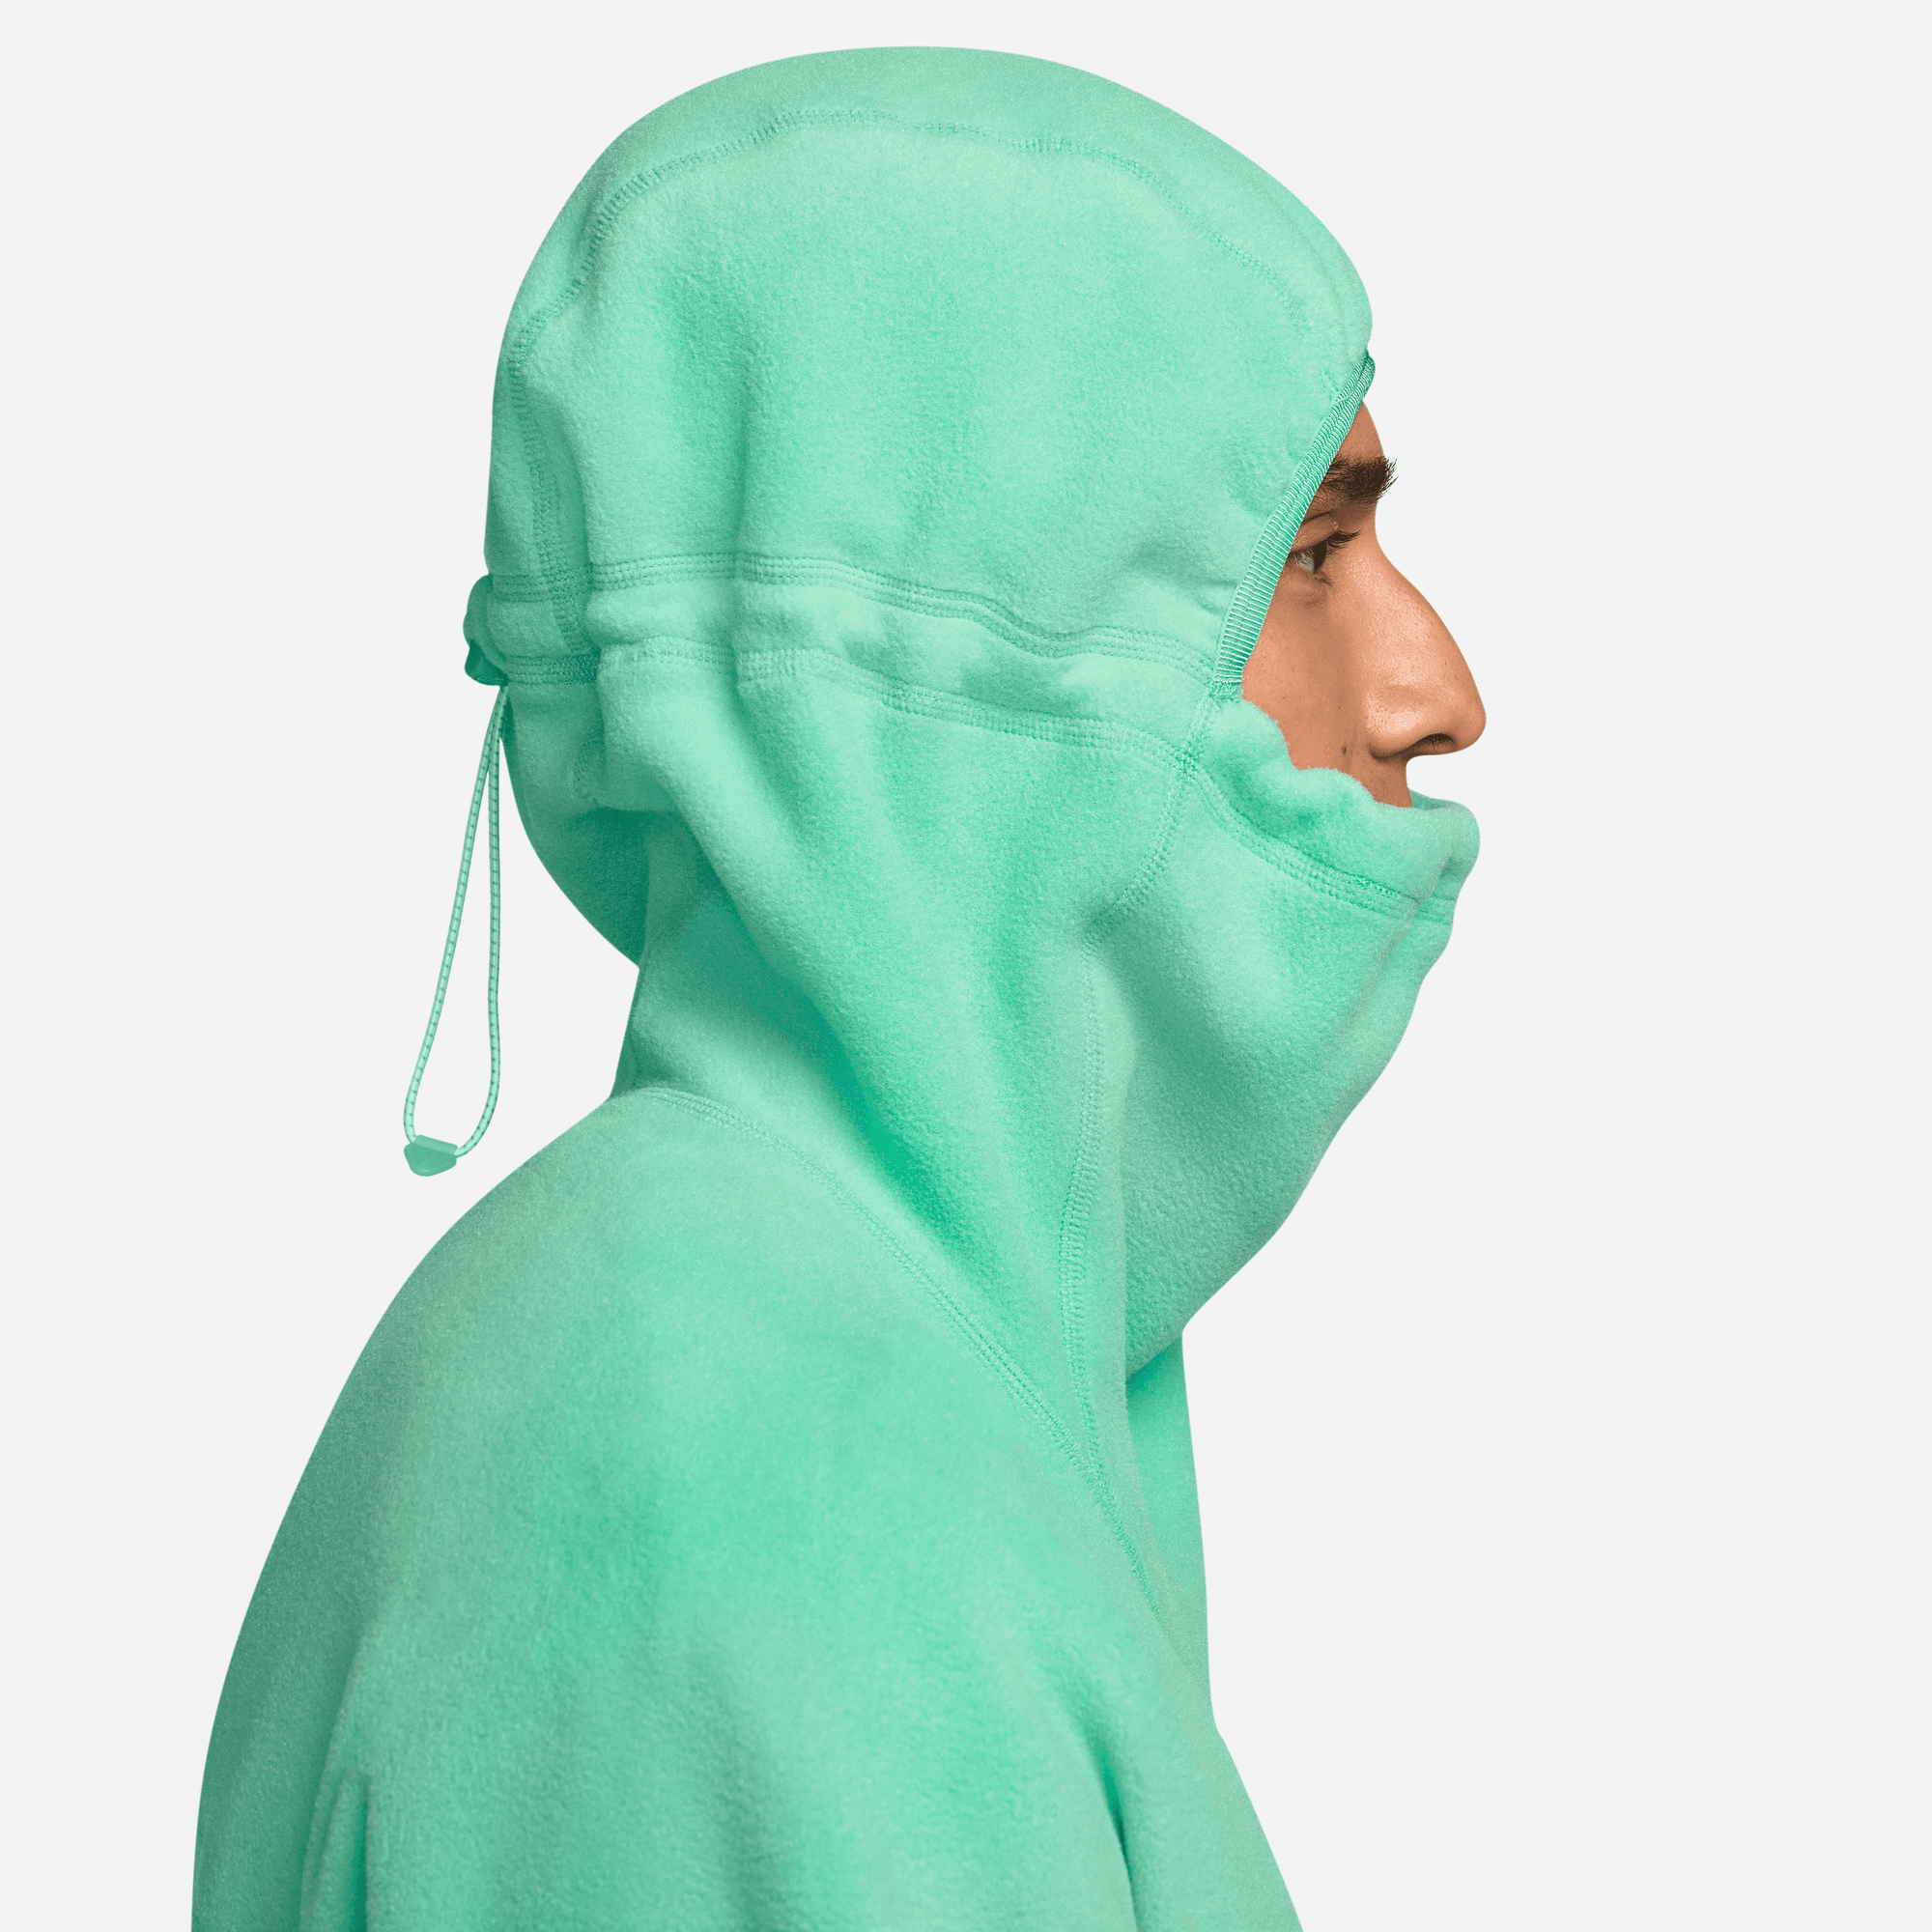 Nike ACG Therma-FIT "Wolf Tree" Pullover Hoodie